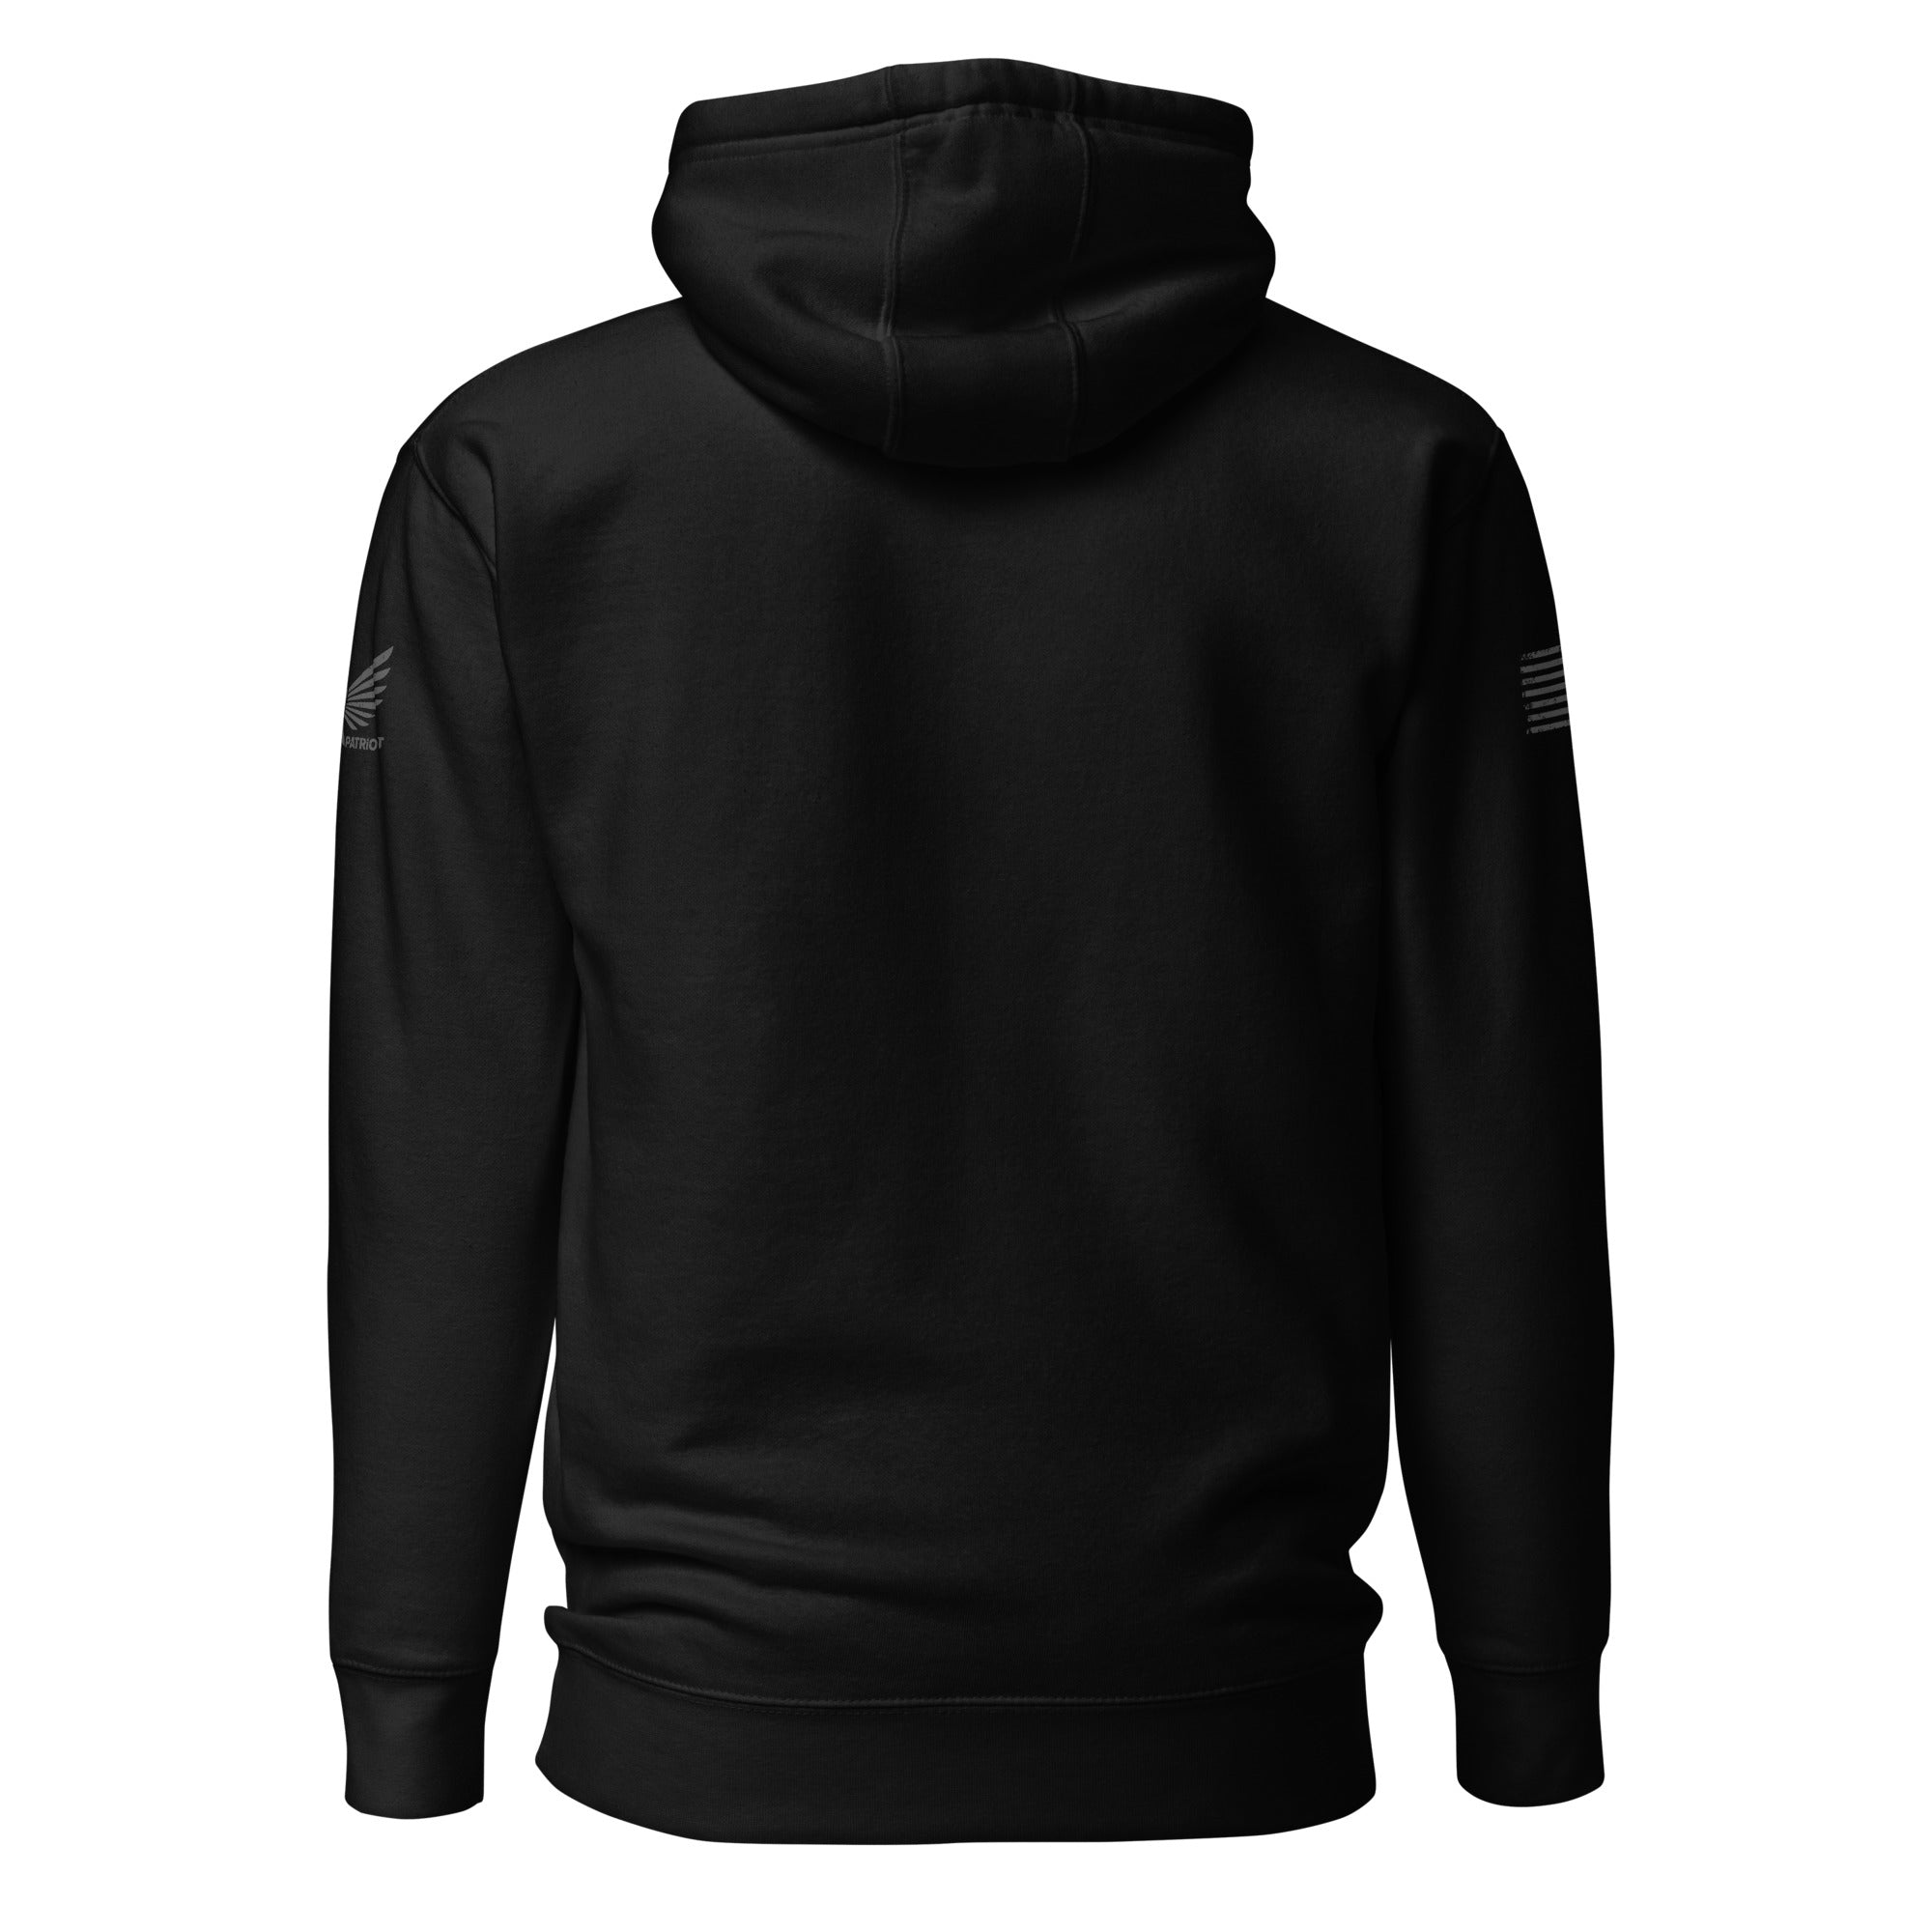 Don't Tread On Me (Black Edition) Hoodie-Premium Hoodie-S-Ardent Patriot Apparel Co.